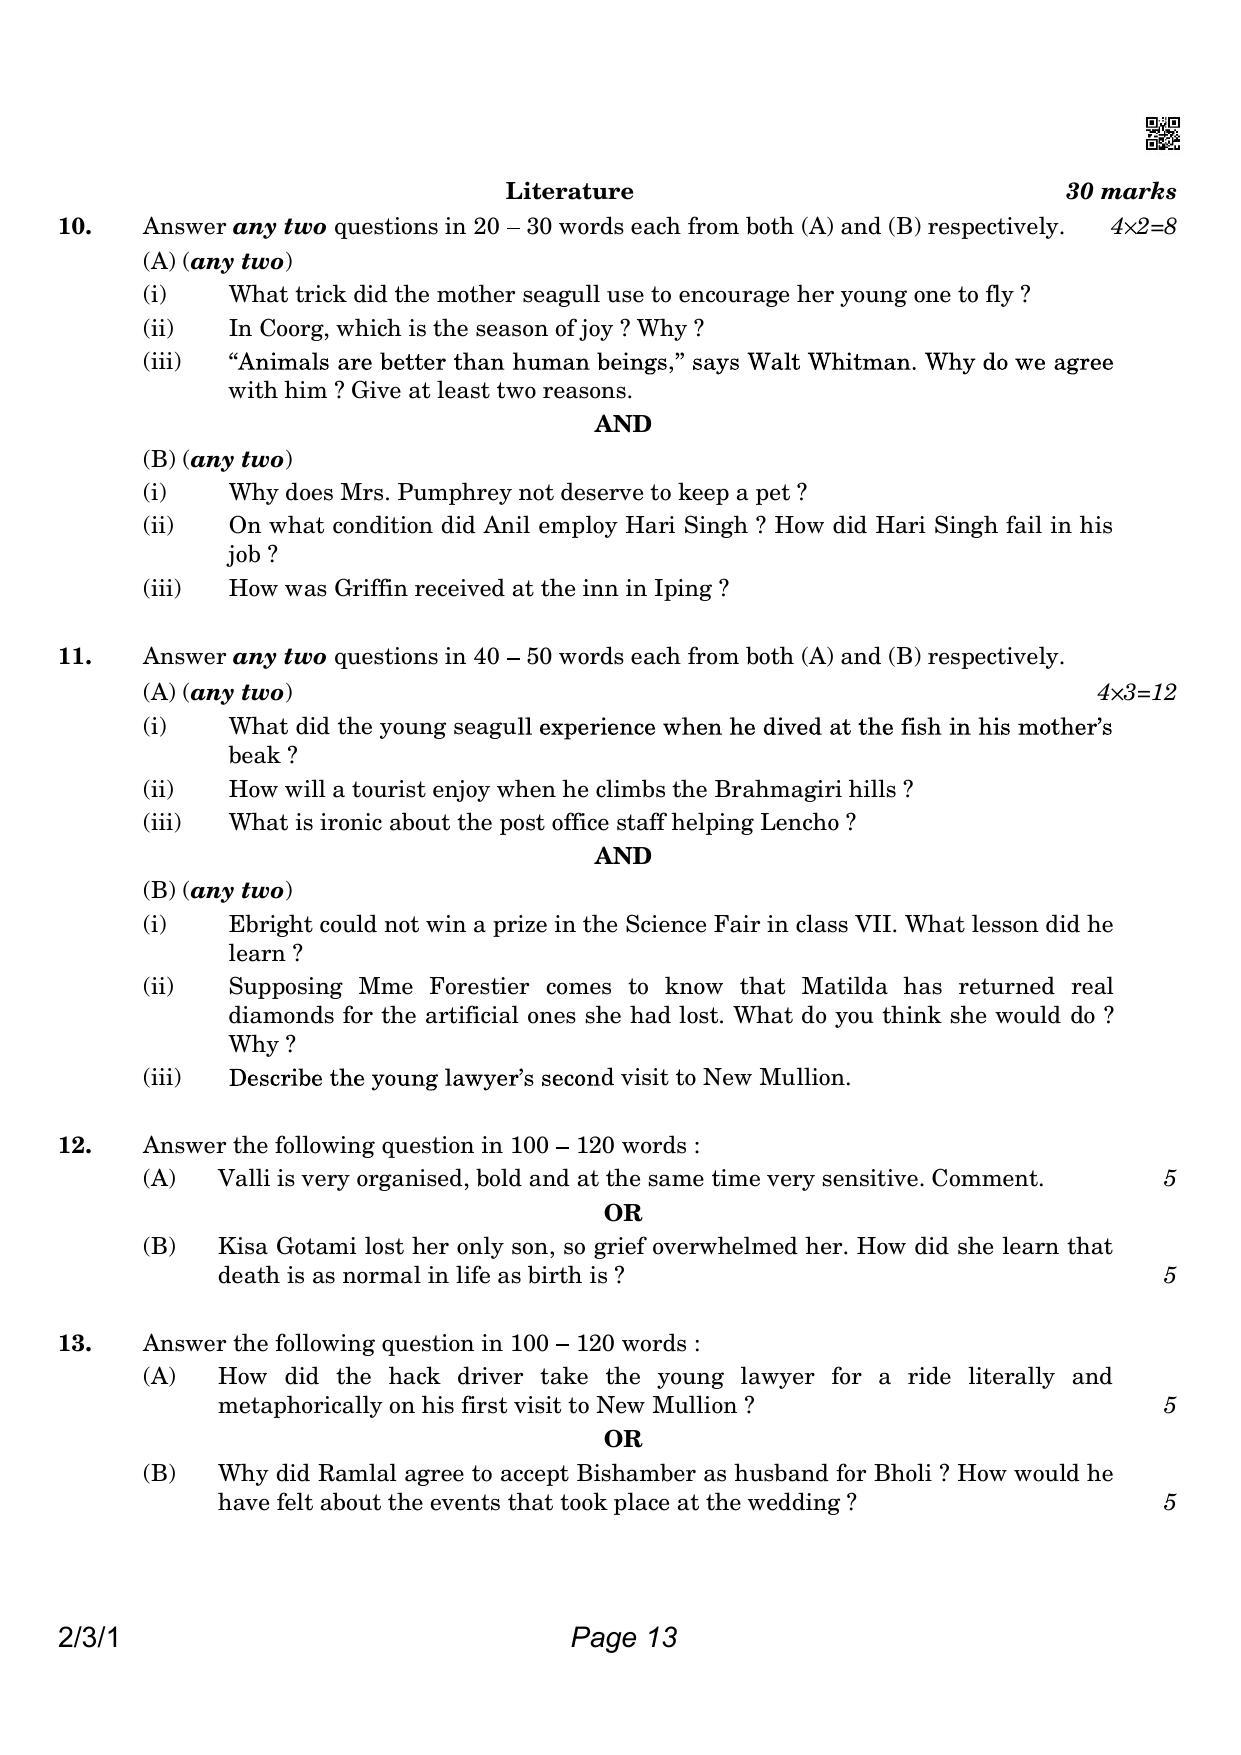 CBSE Class 10 QP_184_ENGLISH_LANGUAGE_AND_LITERATURE 2021 Compartment Question Paper - Page 13